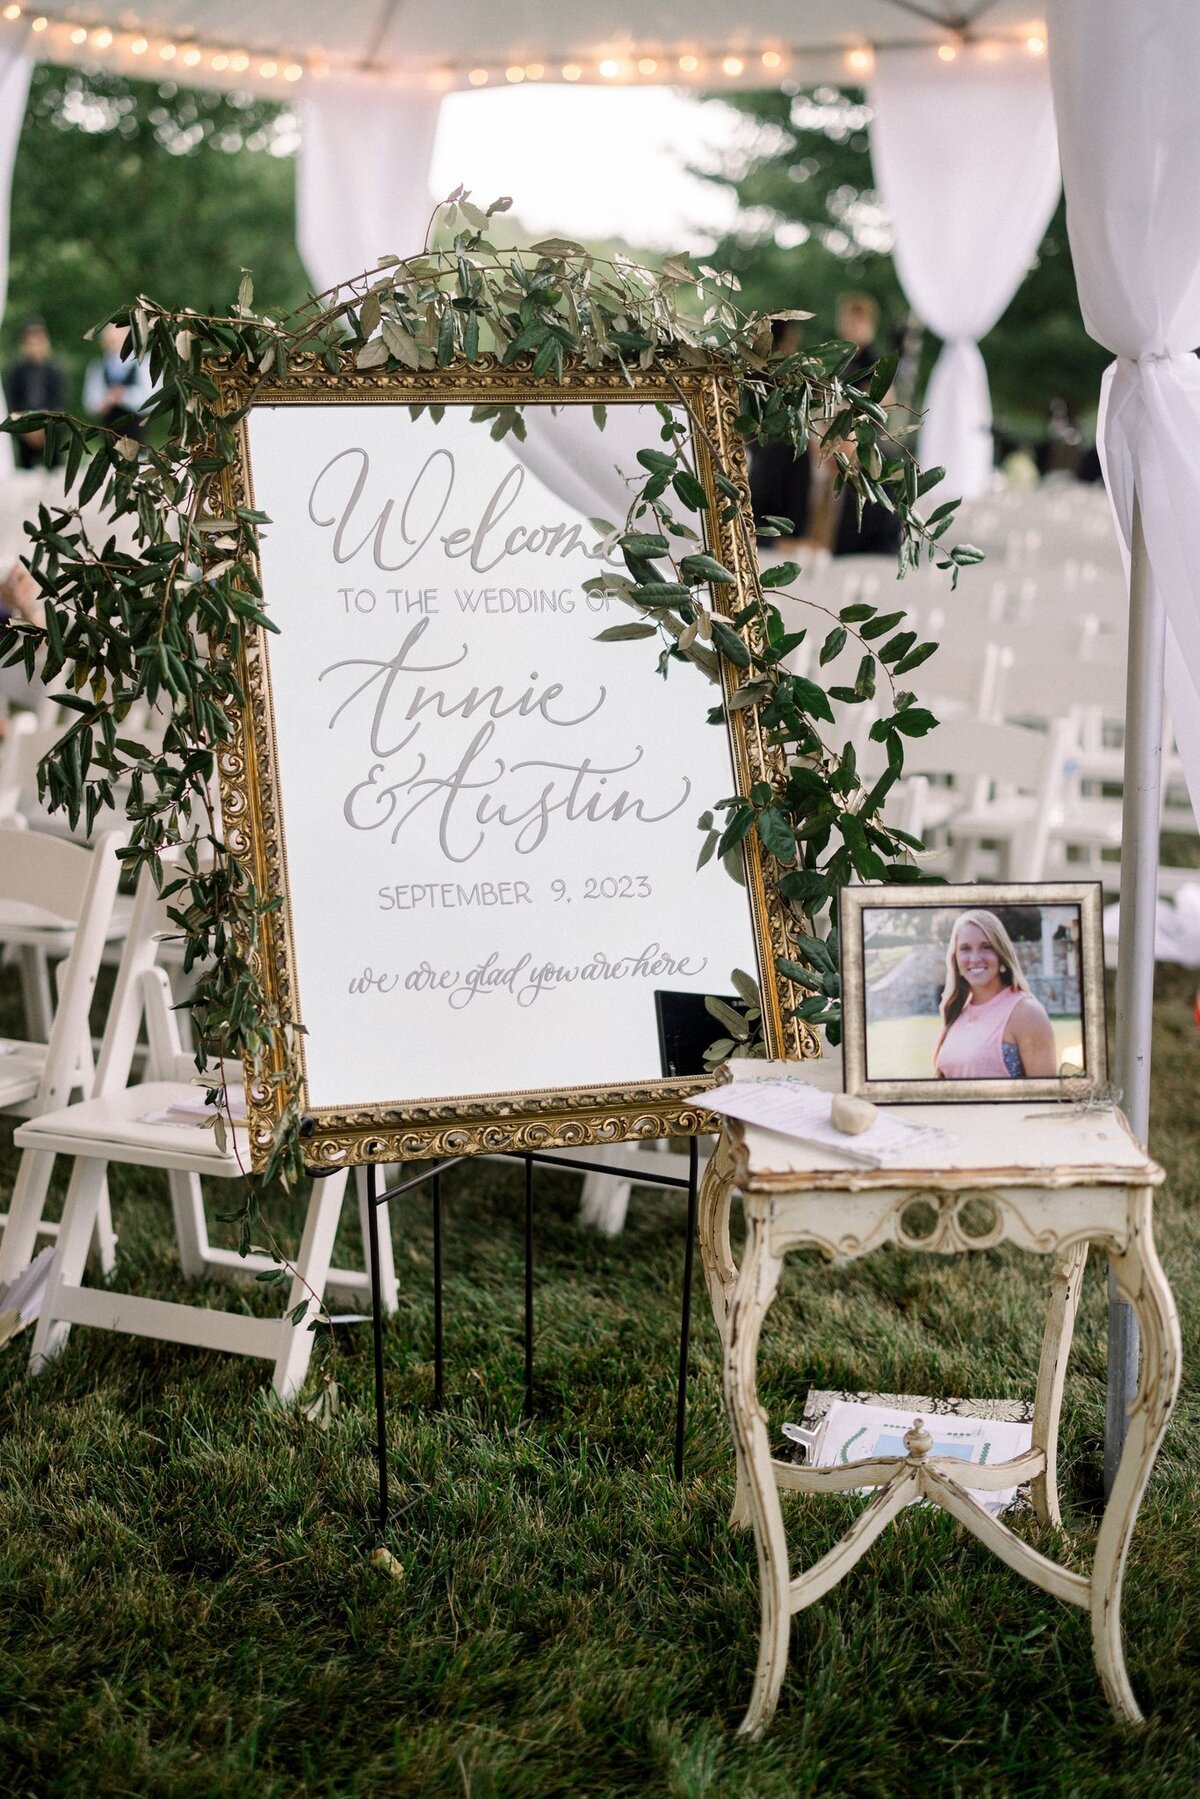 Wedding welcome sign with custom calligraphy in a wedding ceremony site